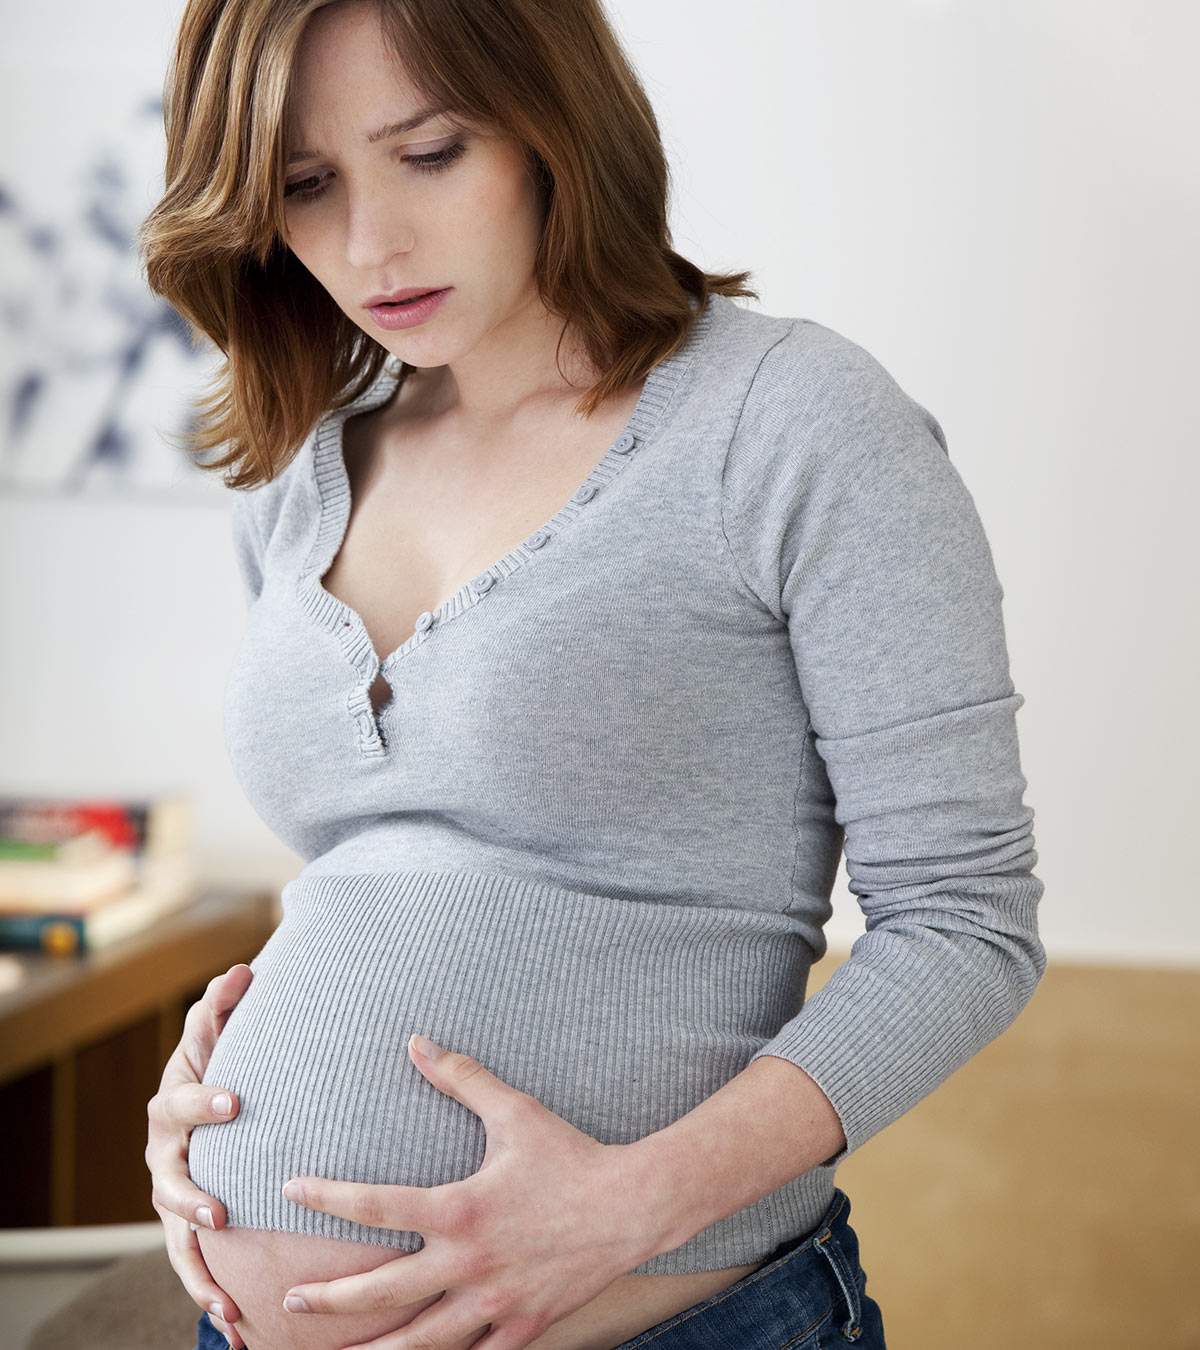 10-Effective-Treatments-To-Cure-IBS-Symptoms-During-Pregnancy1